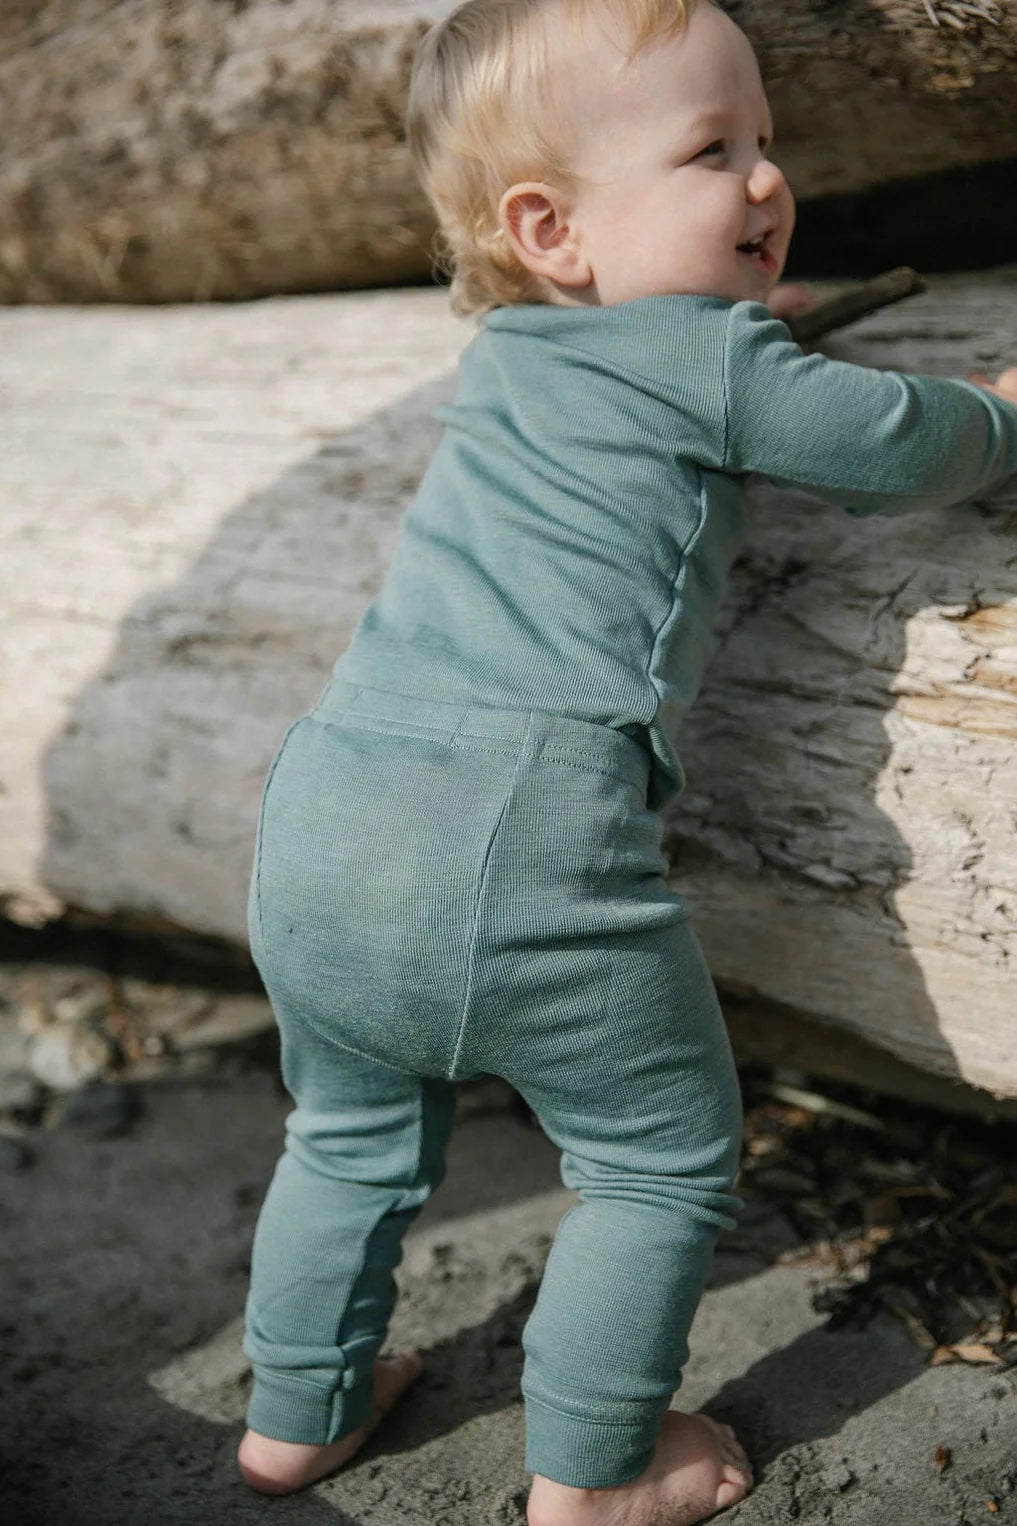 Baby in Simply Merino wool pajamas in willow blue